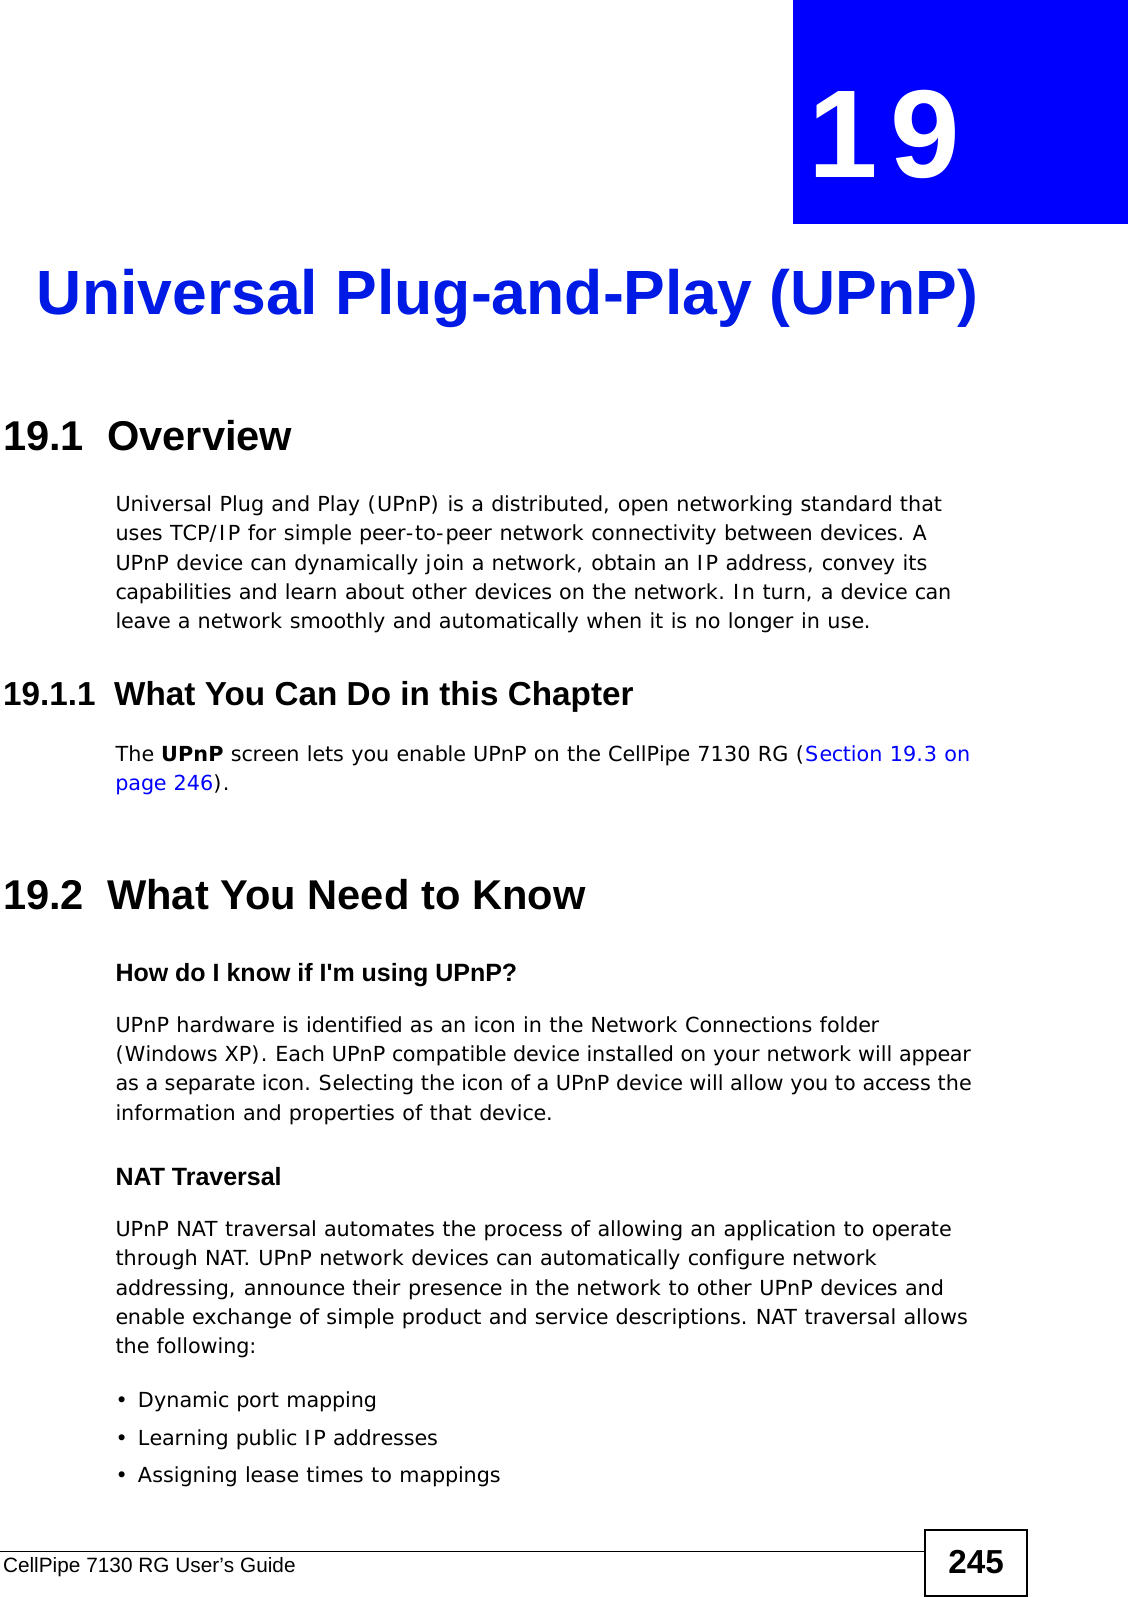 CellPipe 7130 RG User’s Guide 245CHAPTER  19 Universal Plug-and-Play (UPnP)19.1  Overview Universal Plug and Play (UPnP) is a distributed, open networking standard that uses TCP/IP for simple peer-to-peer network connectivity between devices. A UPnP device can dynamically join a network, obtain an IP address, convey its capabilities and learn about other devices on the network. In turn, a device can leave a network smoothly and automatically when it is no longer in use.19.1.1  What You Can Do in this ChapterThe UPnP screen lets you enable UPnP on the CellPipe 7130 RG (Section 19.3 on page 246).19.2  What You Need to KnowHow do I know if I&apos;m using UPnP? UPnP hardware is identified as an icon in the Network Connections folder (Windows XP). Each UPnP compatible device installed on your network will appear as a separate icon. Selecting the icon of a UPnP device will allow you to access the information and properties of that device. NAT TraversalUPnP NAT traversal automates the process of allowing an application to operate through NAT. UPnP network devices can automatically configure network addressing, announce their presence in the network to other UPnP devices and enable exchange of simple product and service descriptions. NAT traversal allows the following:• Dynamic port mapping• Learning public IP addresses• Assigning lease times to mappings